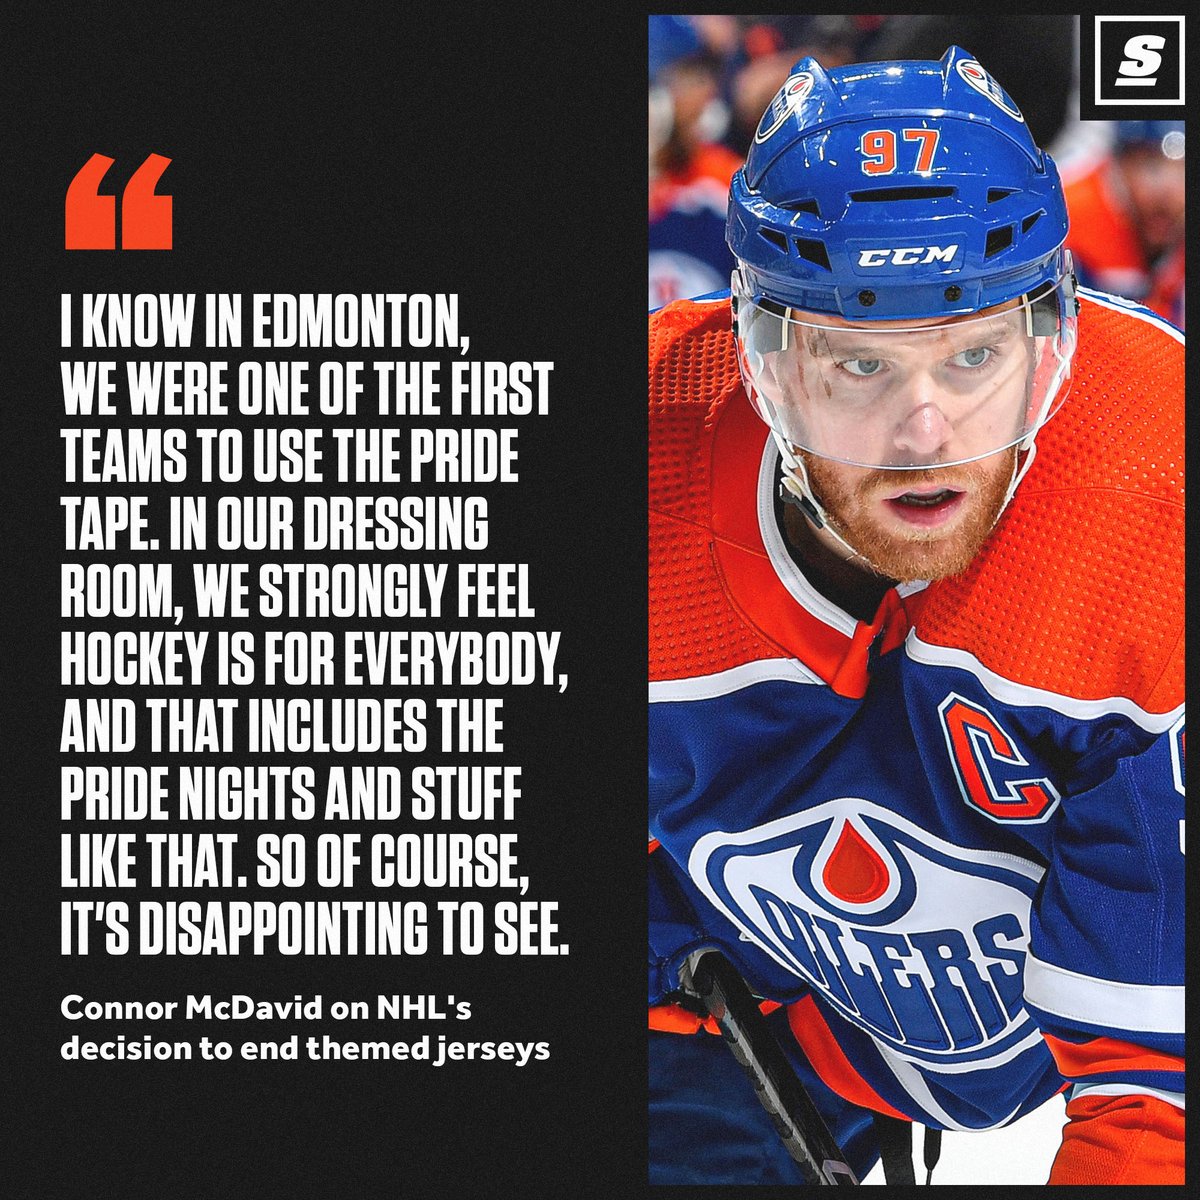 Connor McDavid isn't thrilled about the NHL's new policy against themed jerseys. thesco.re/3Nwgmhy